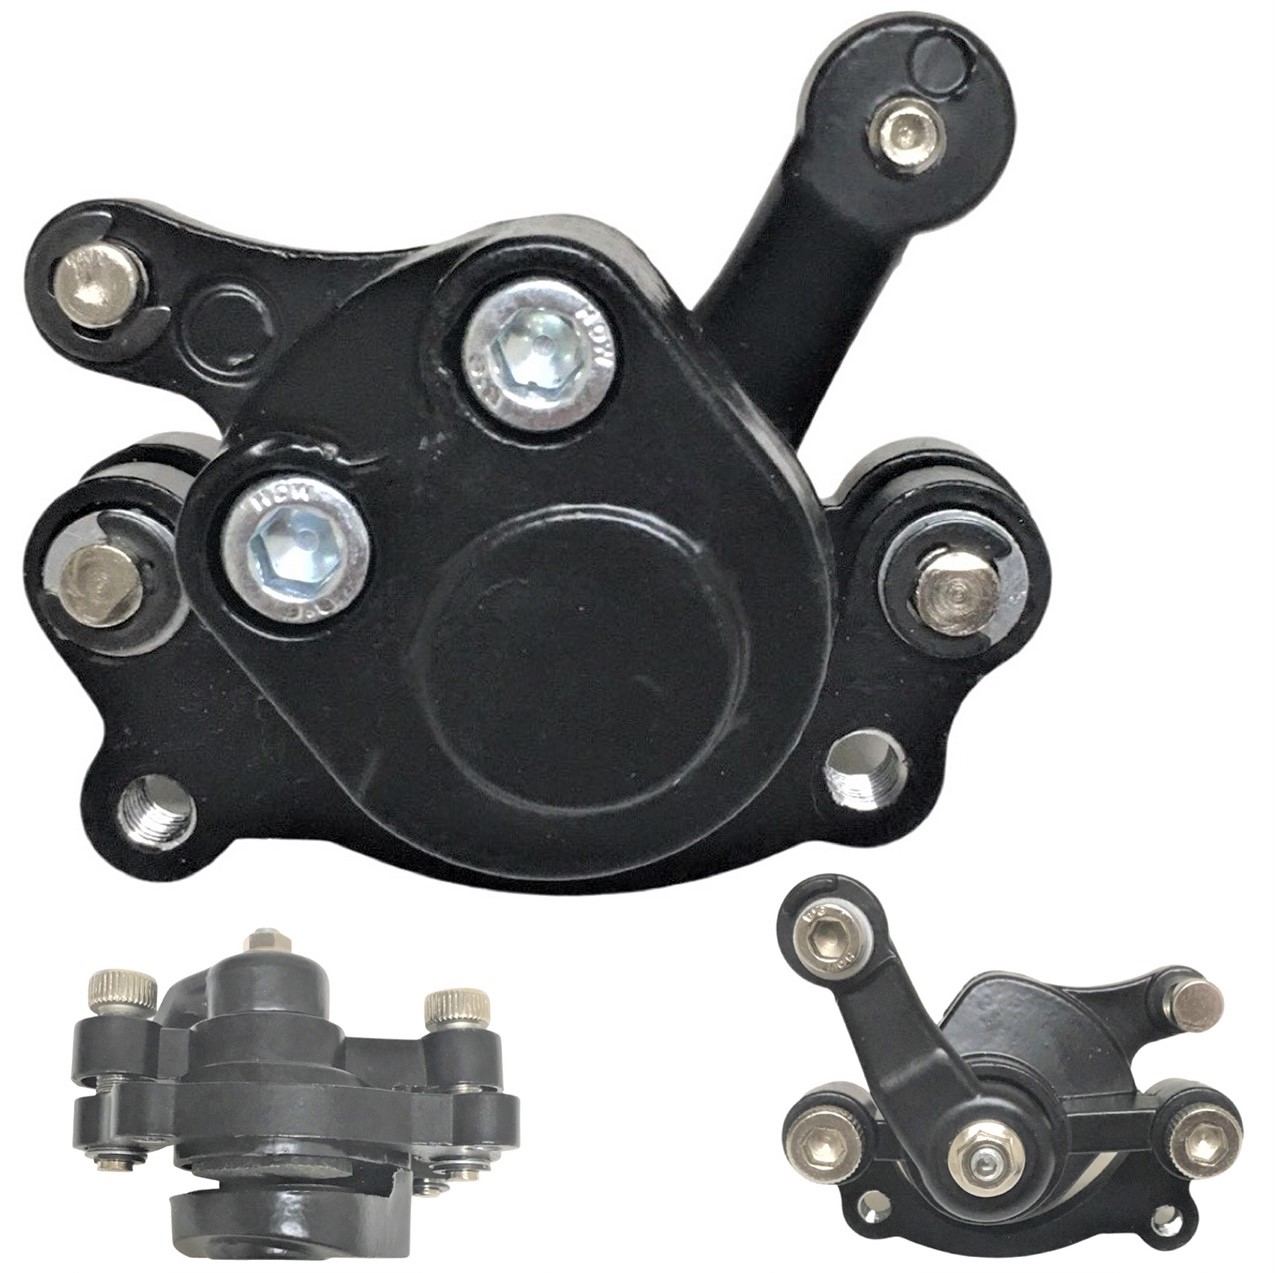 Manual Brake Caliper - Fits Many Minibikes and GoKarts Bolts c/c=51mm Comes with Brake Pads